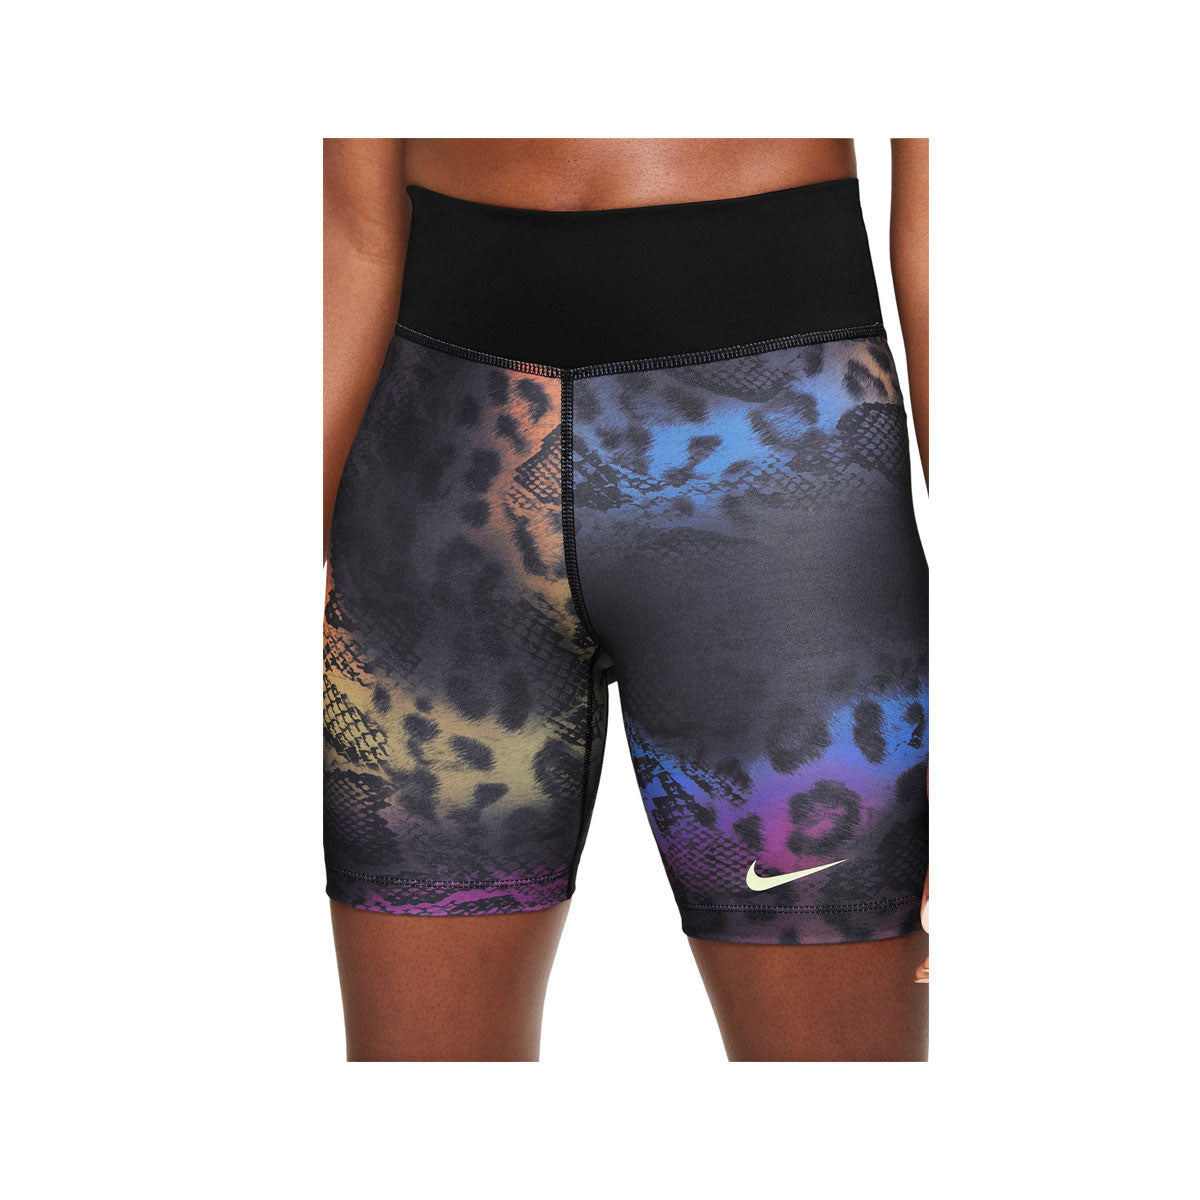 Nike Women's One 7-Inch Training Shorts Multi-Color Leopard Print